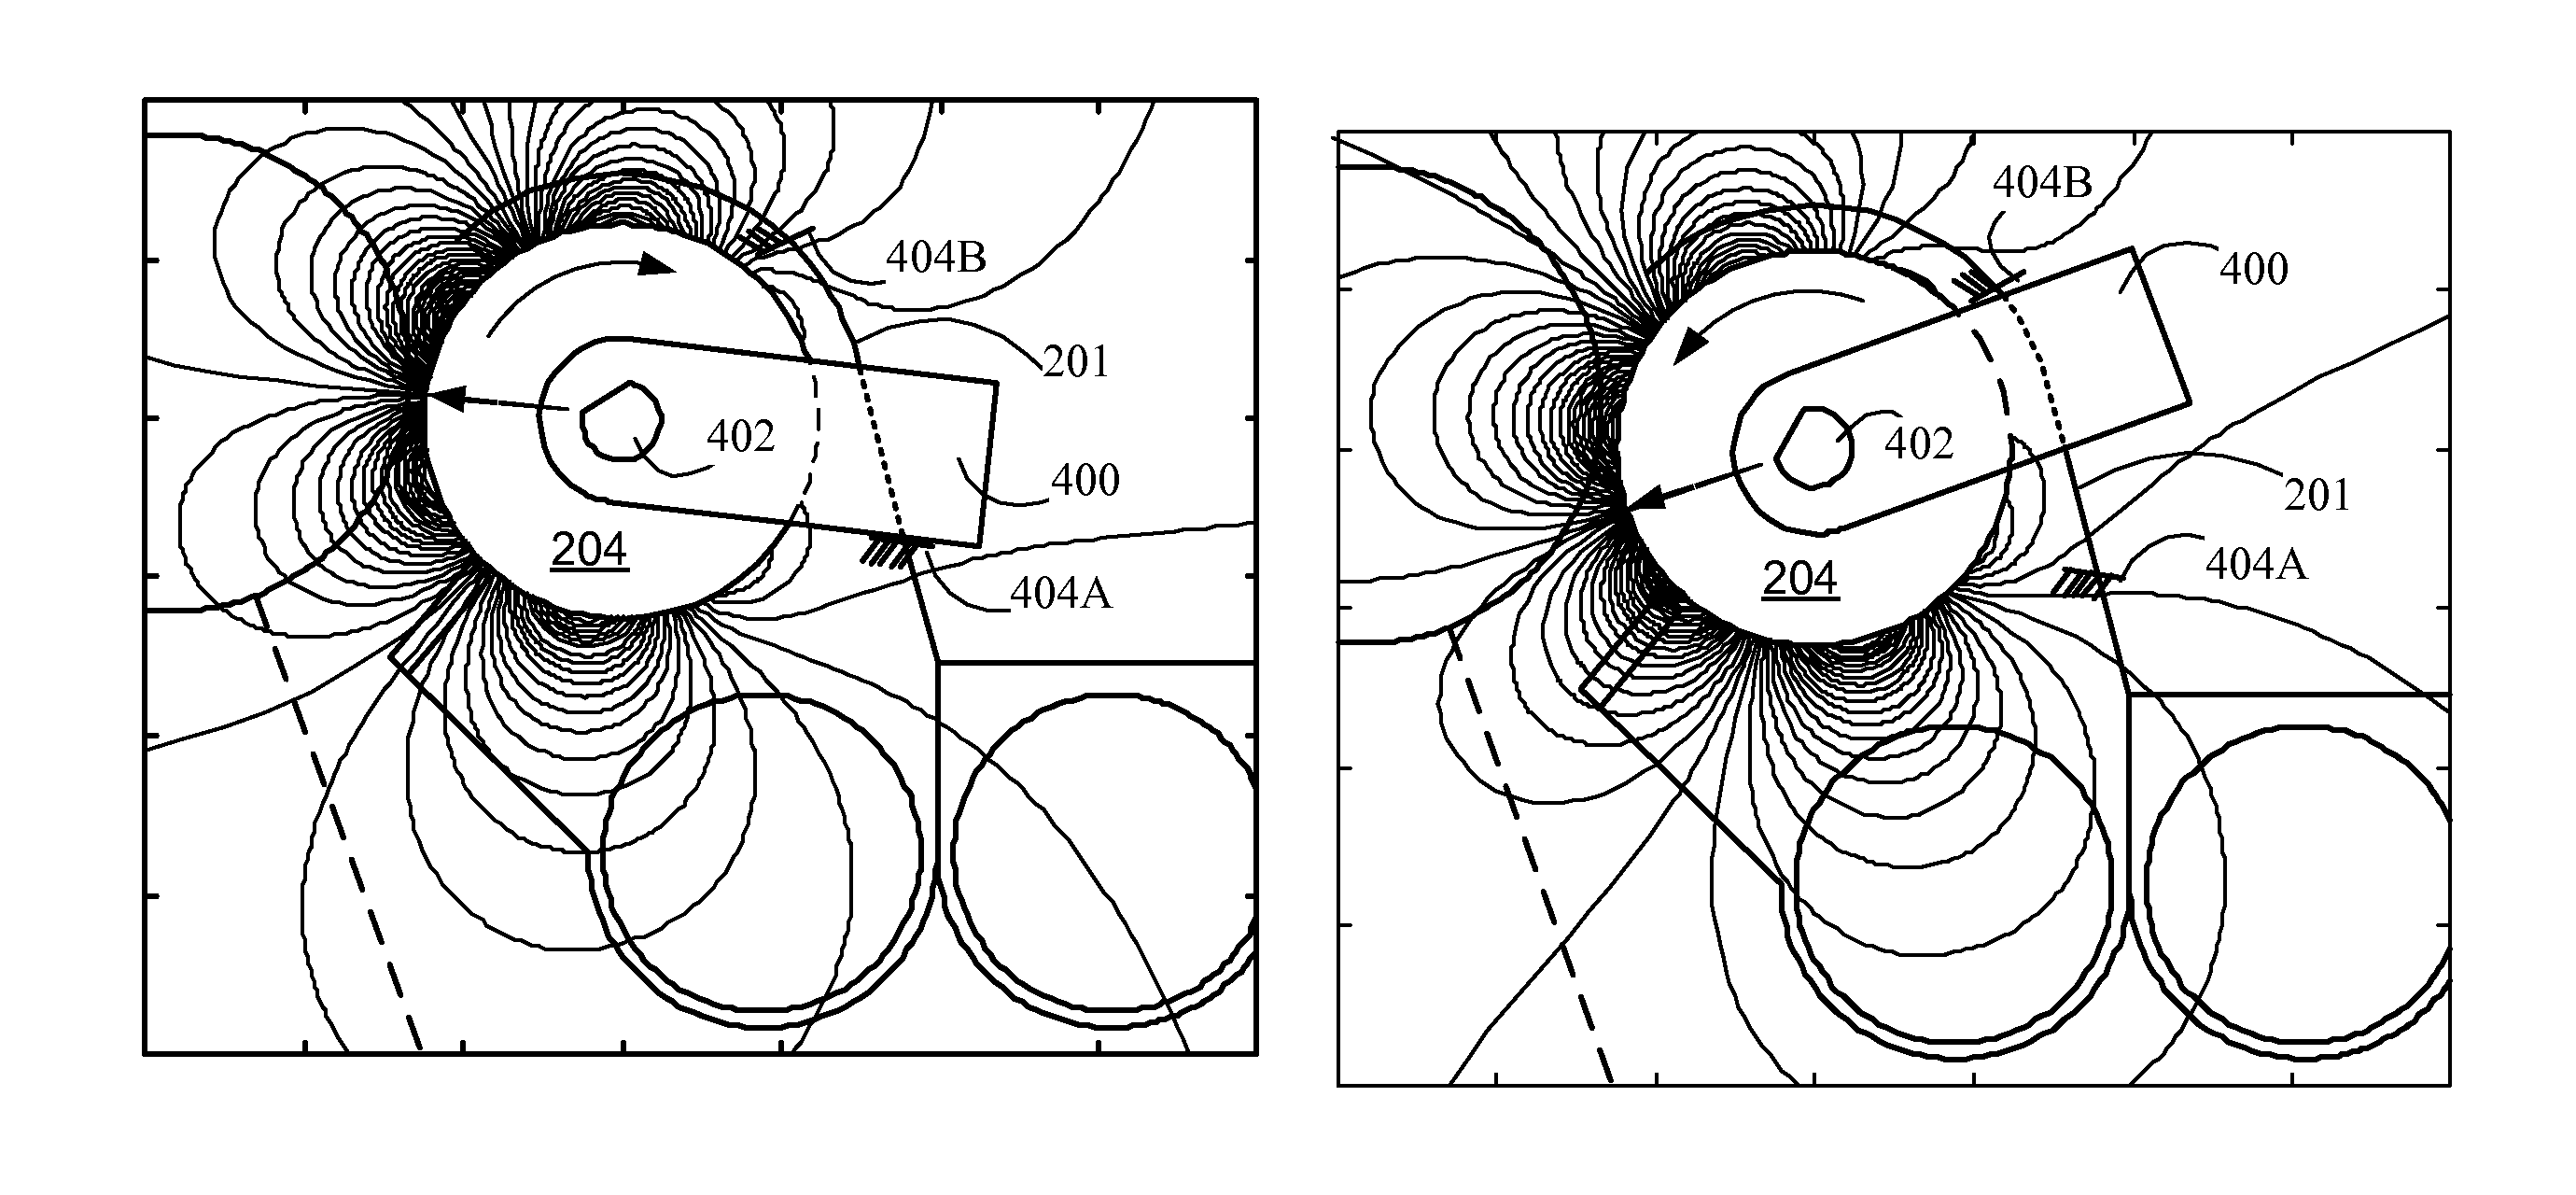 Method and apparatus for magnetic brush retraction in electrophotographic system